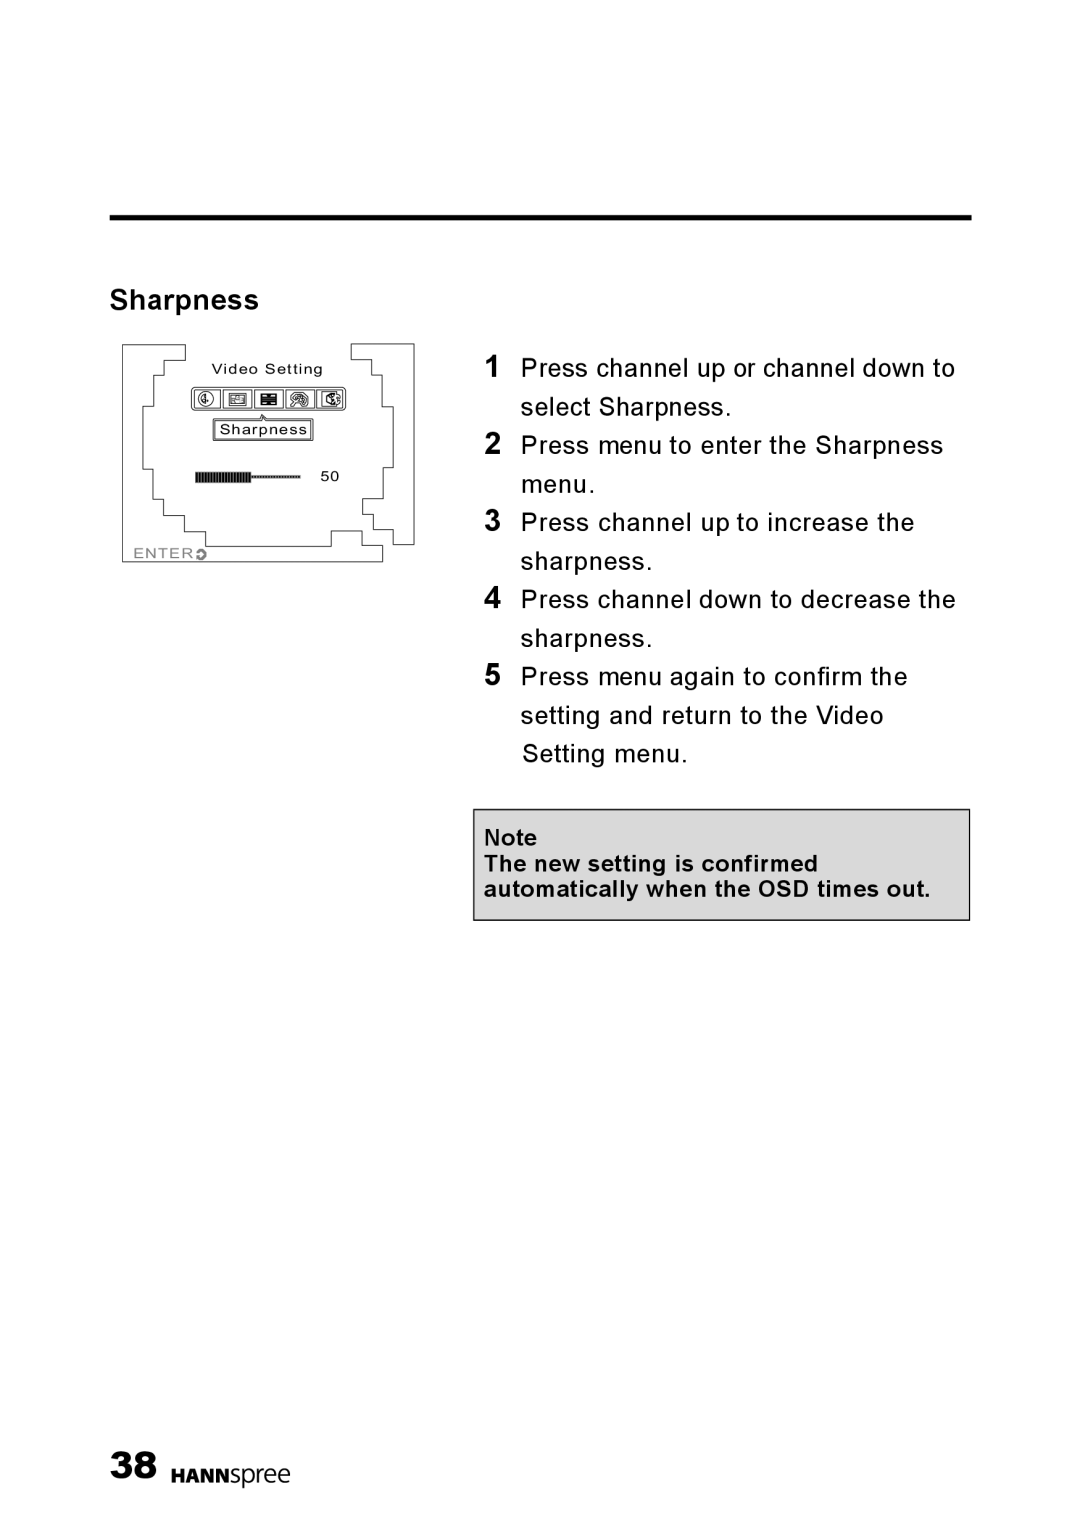 HANNspree HANNSz.crab Press channel up or channel down to select Sharpness, Press menu to enter the Sharpness menu 